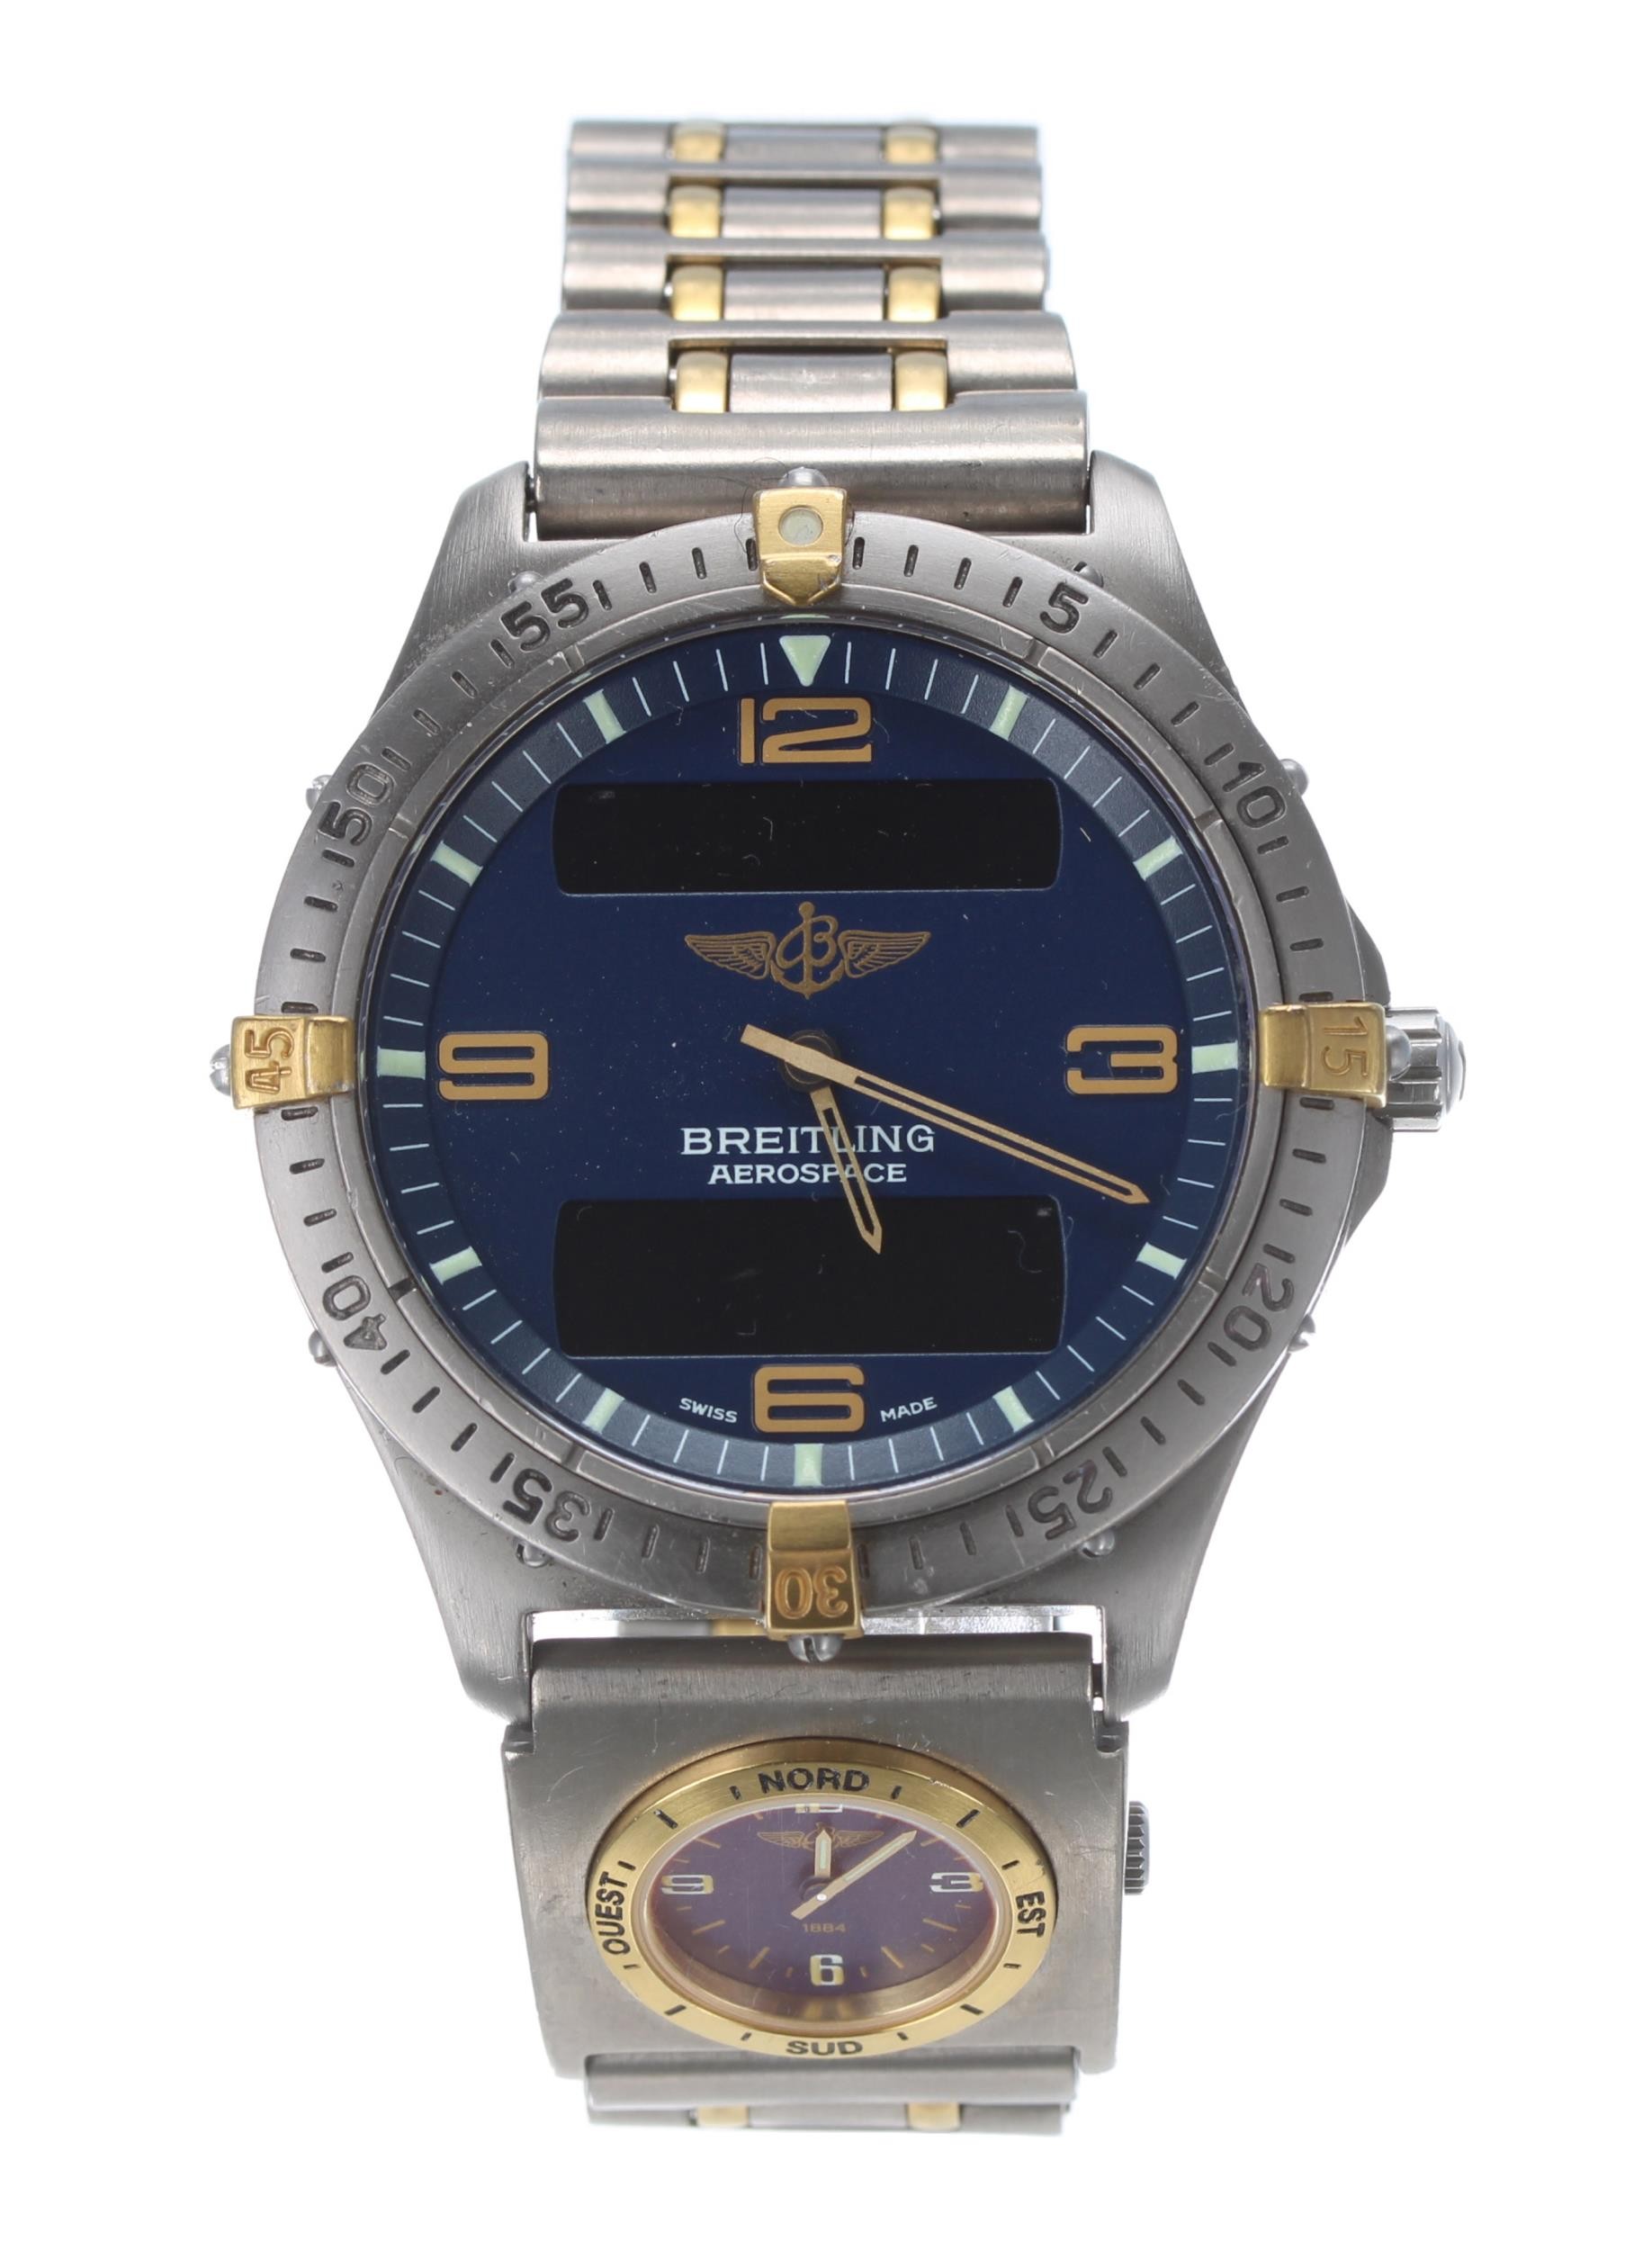 The Andy Elson Breitling Collection - Orbiter 1 - Breitling Aerospace titanium gentleman's - Image 2 of 11